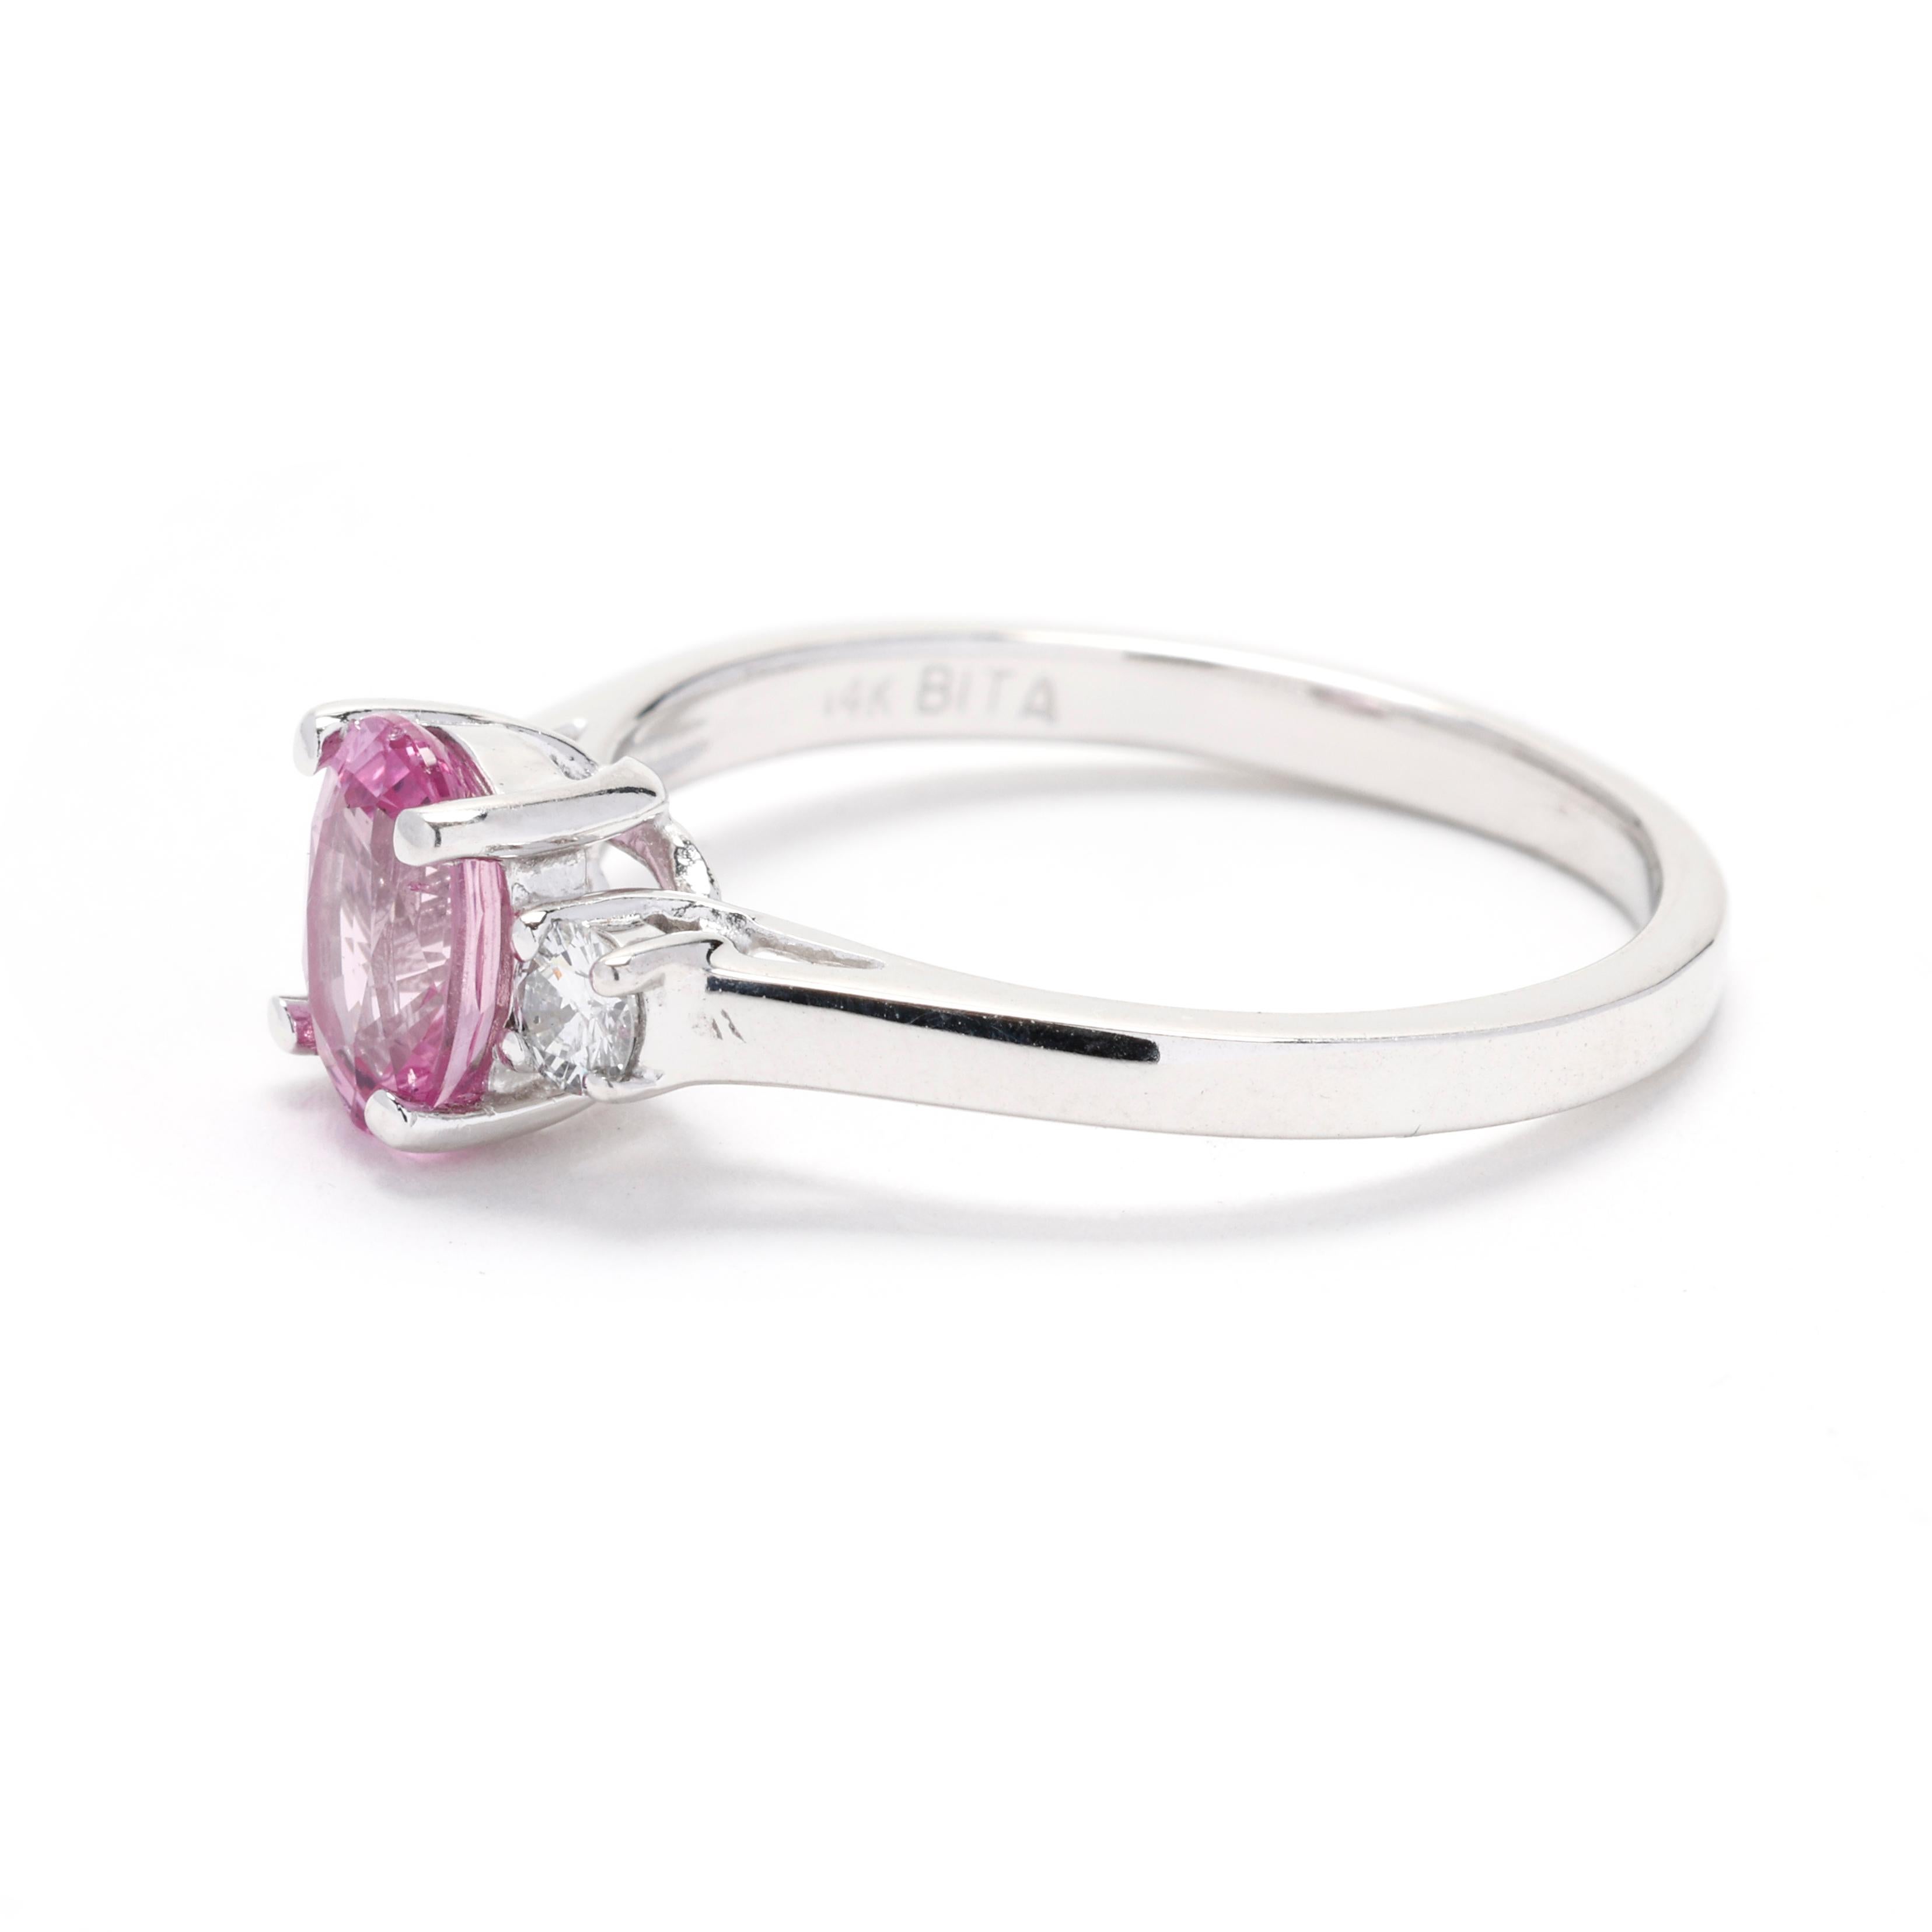 1.36ctw Diamond and Pink Sapphire 3 Stone Ring, 14k White Gold, Ring Size 7 In Good Condition For Sale In McLeansville, NC